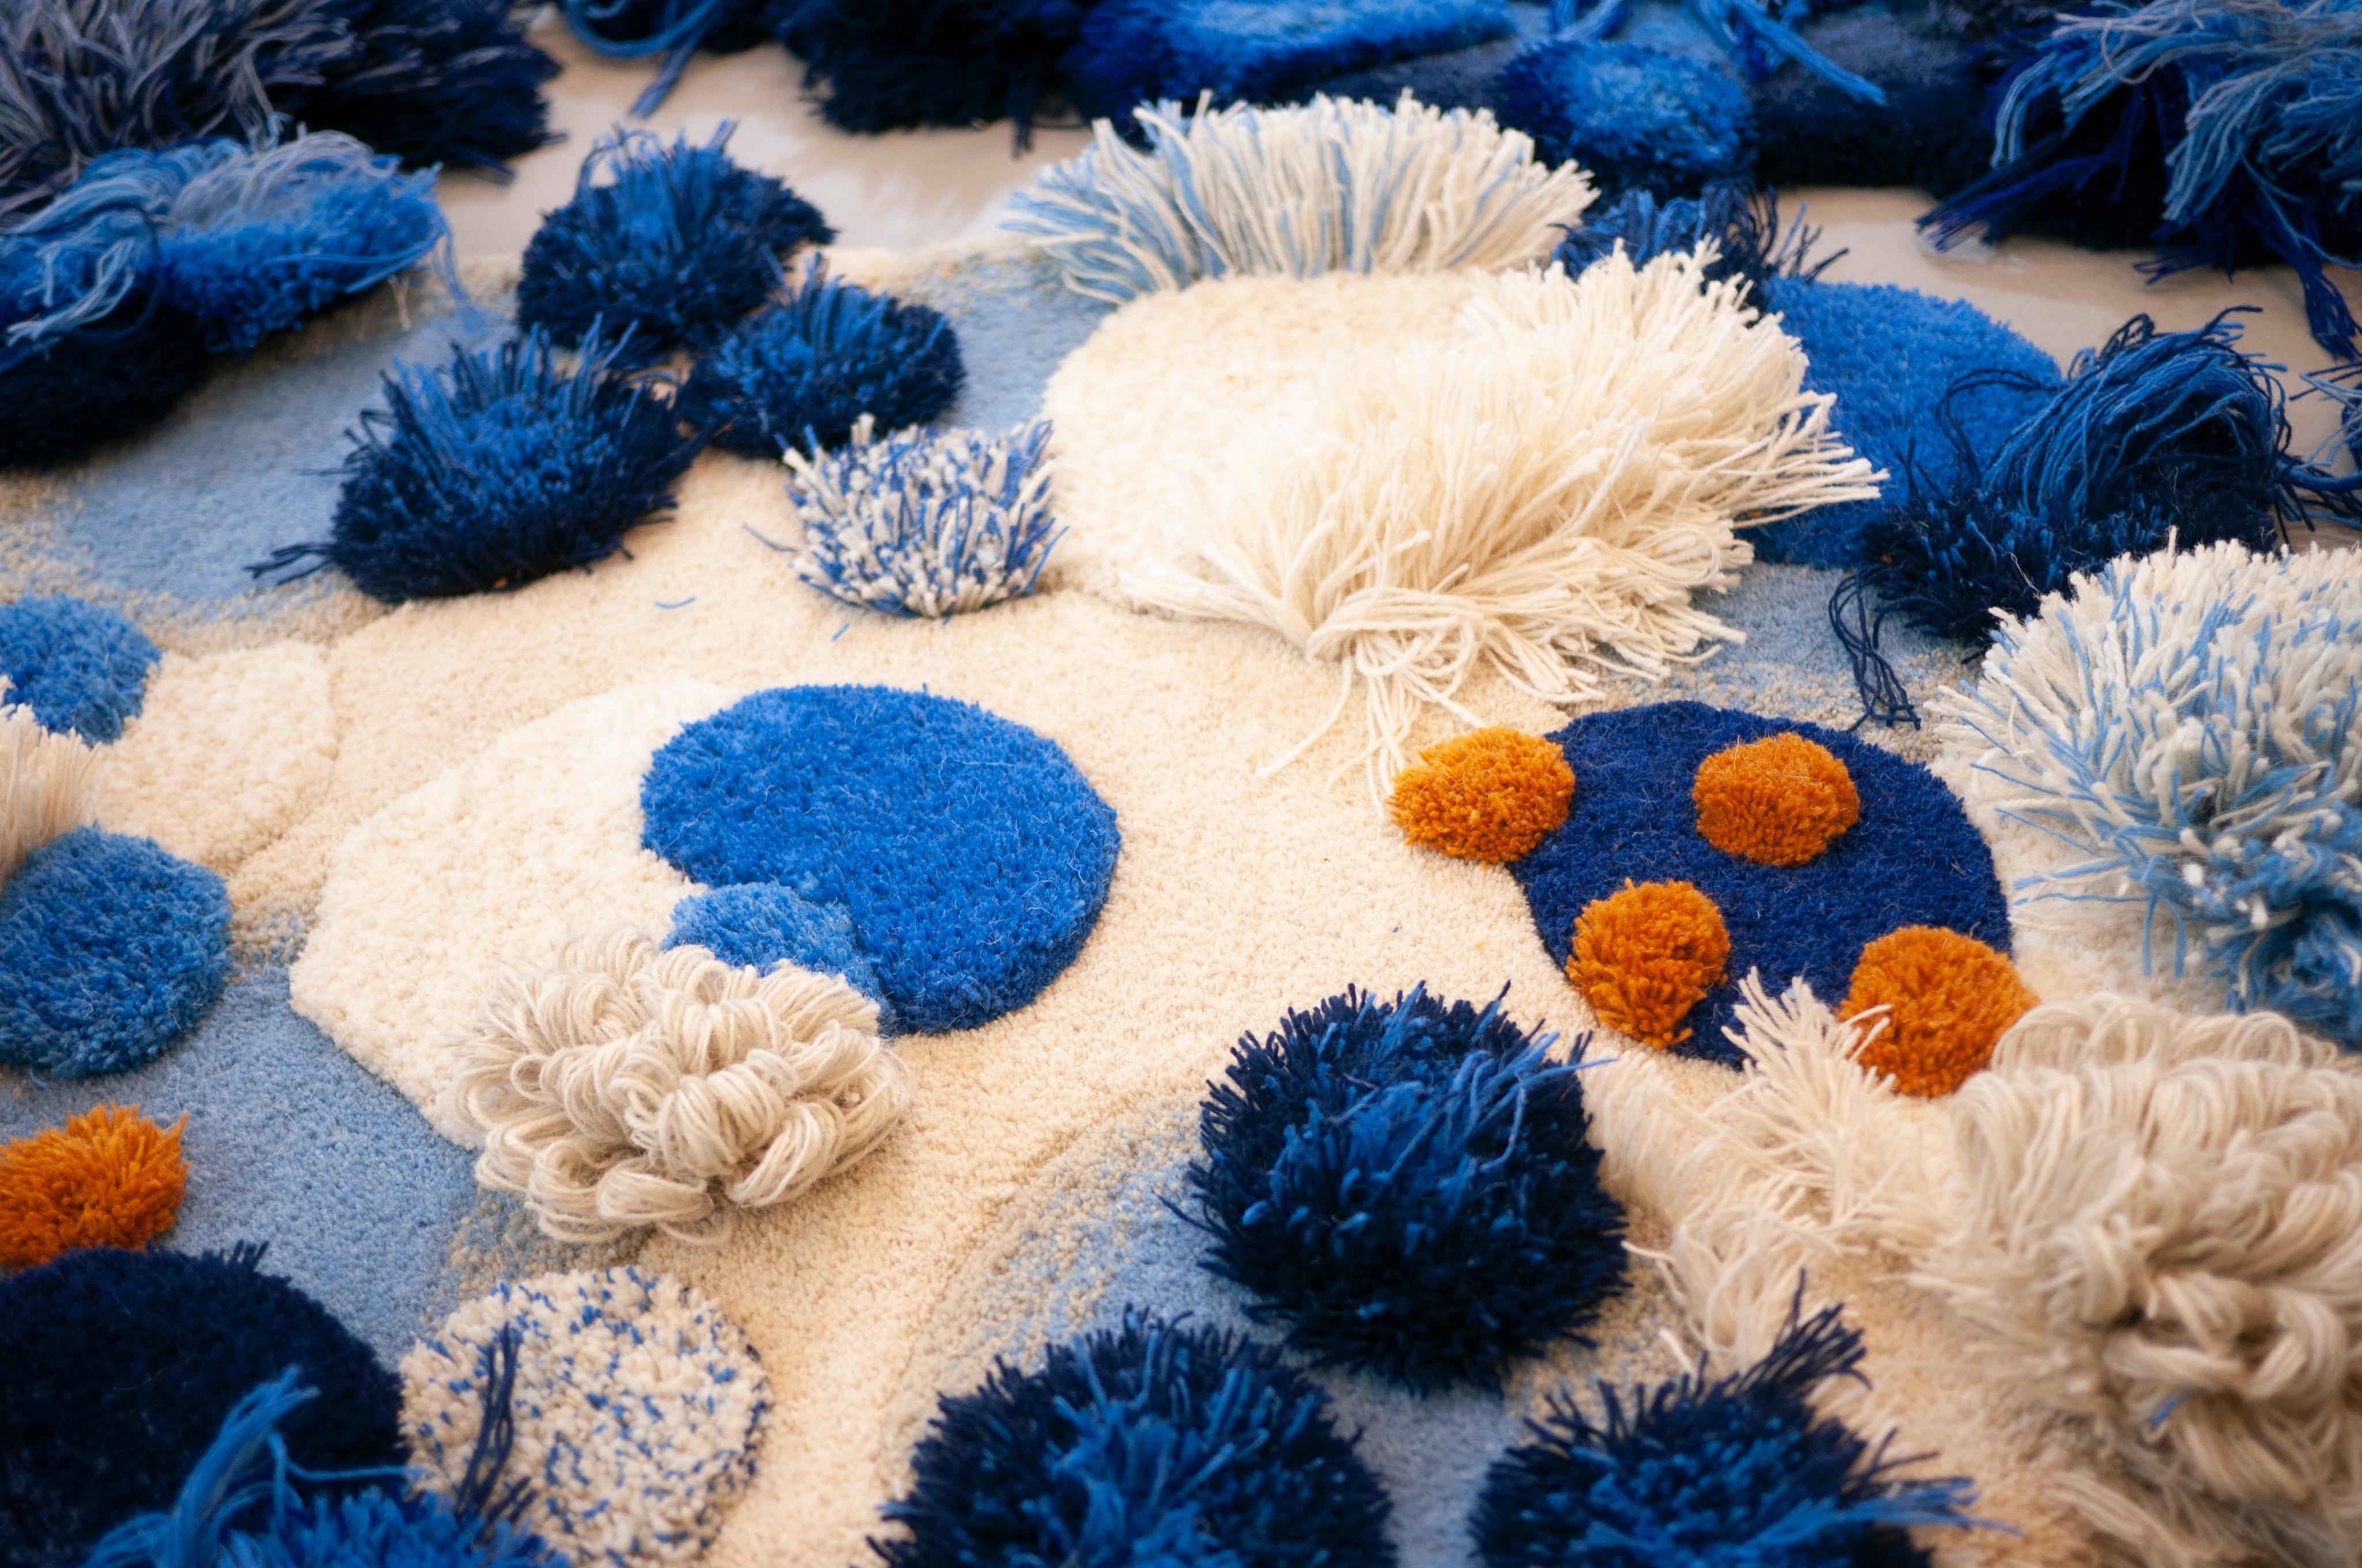 A smaller wool landscape for floor or wall.
Glimpses of positive futures, imagine living with a soft coral reef in your house, the idea that anything is possible creates a hopeful living. White, blue and mustard shades make up this intricately woven